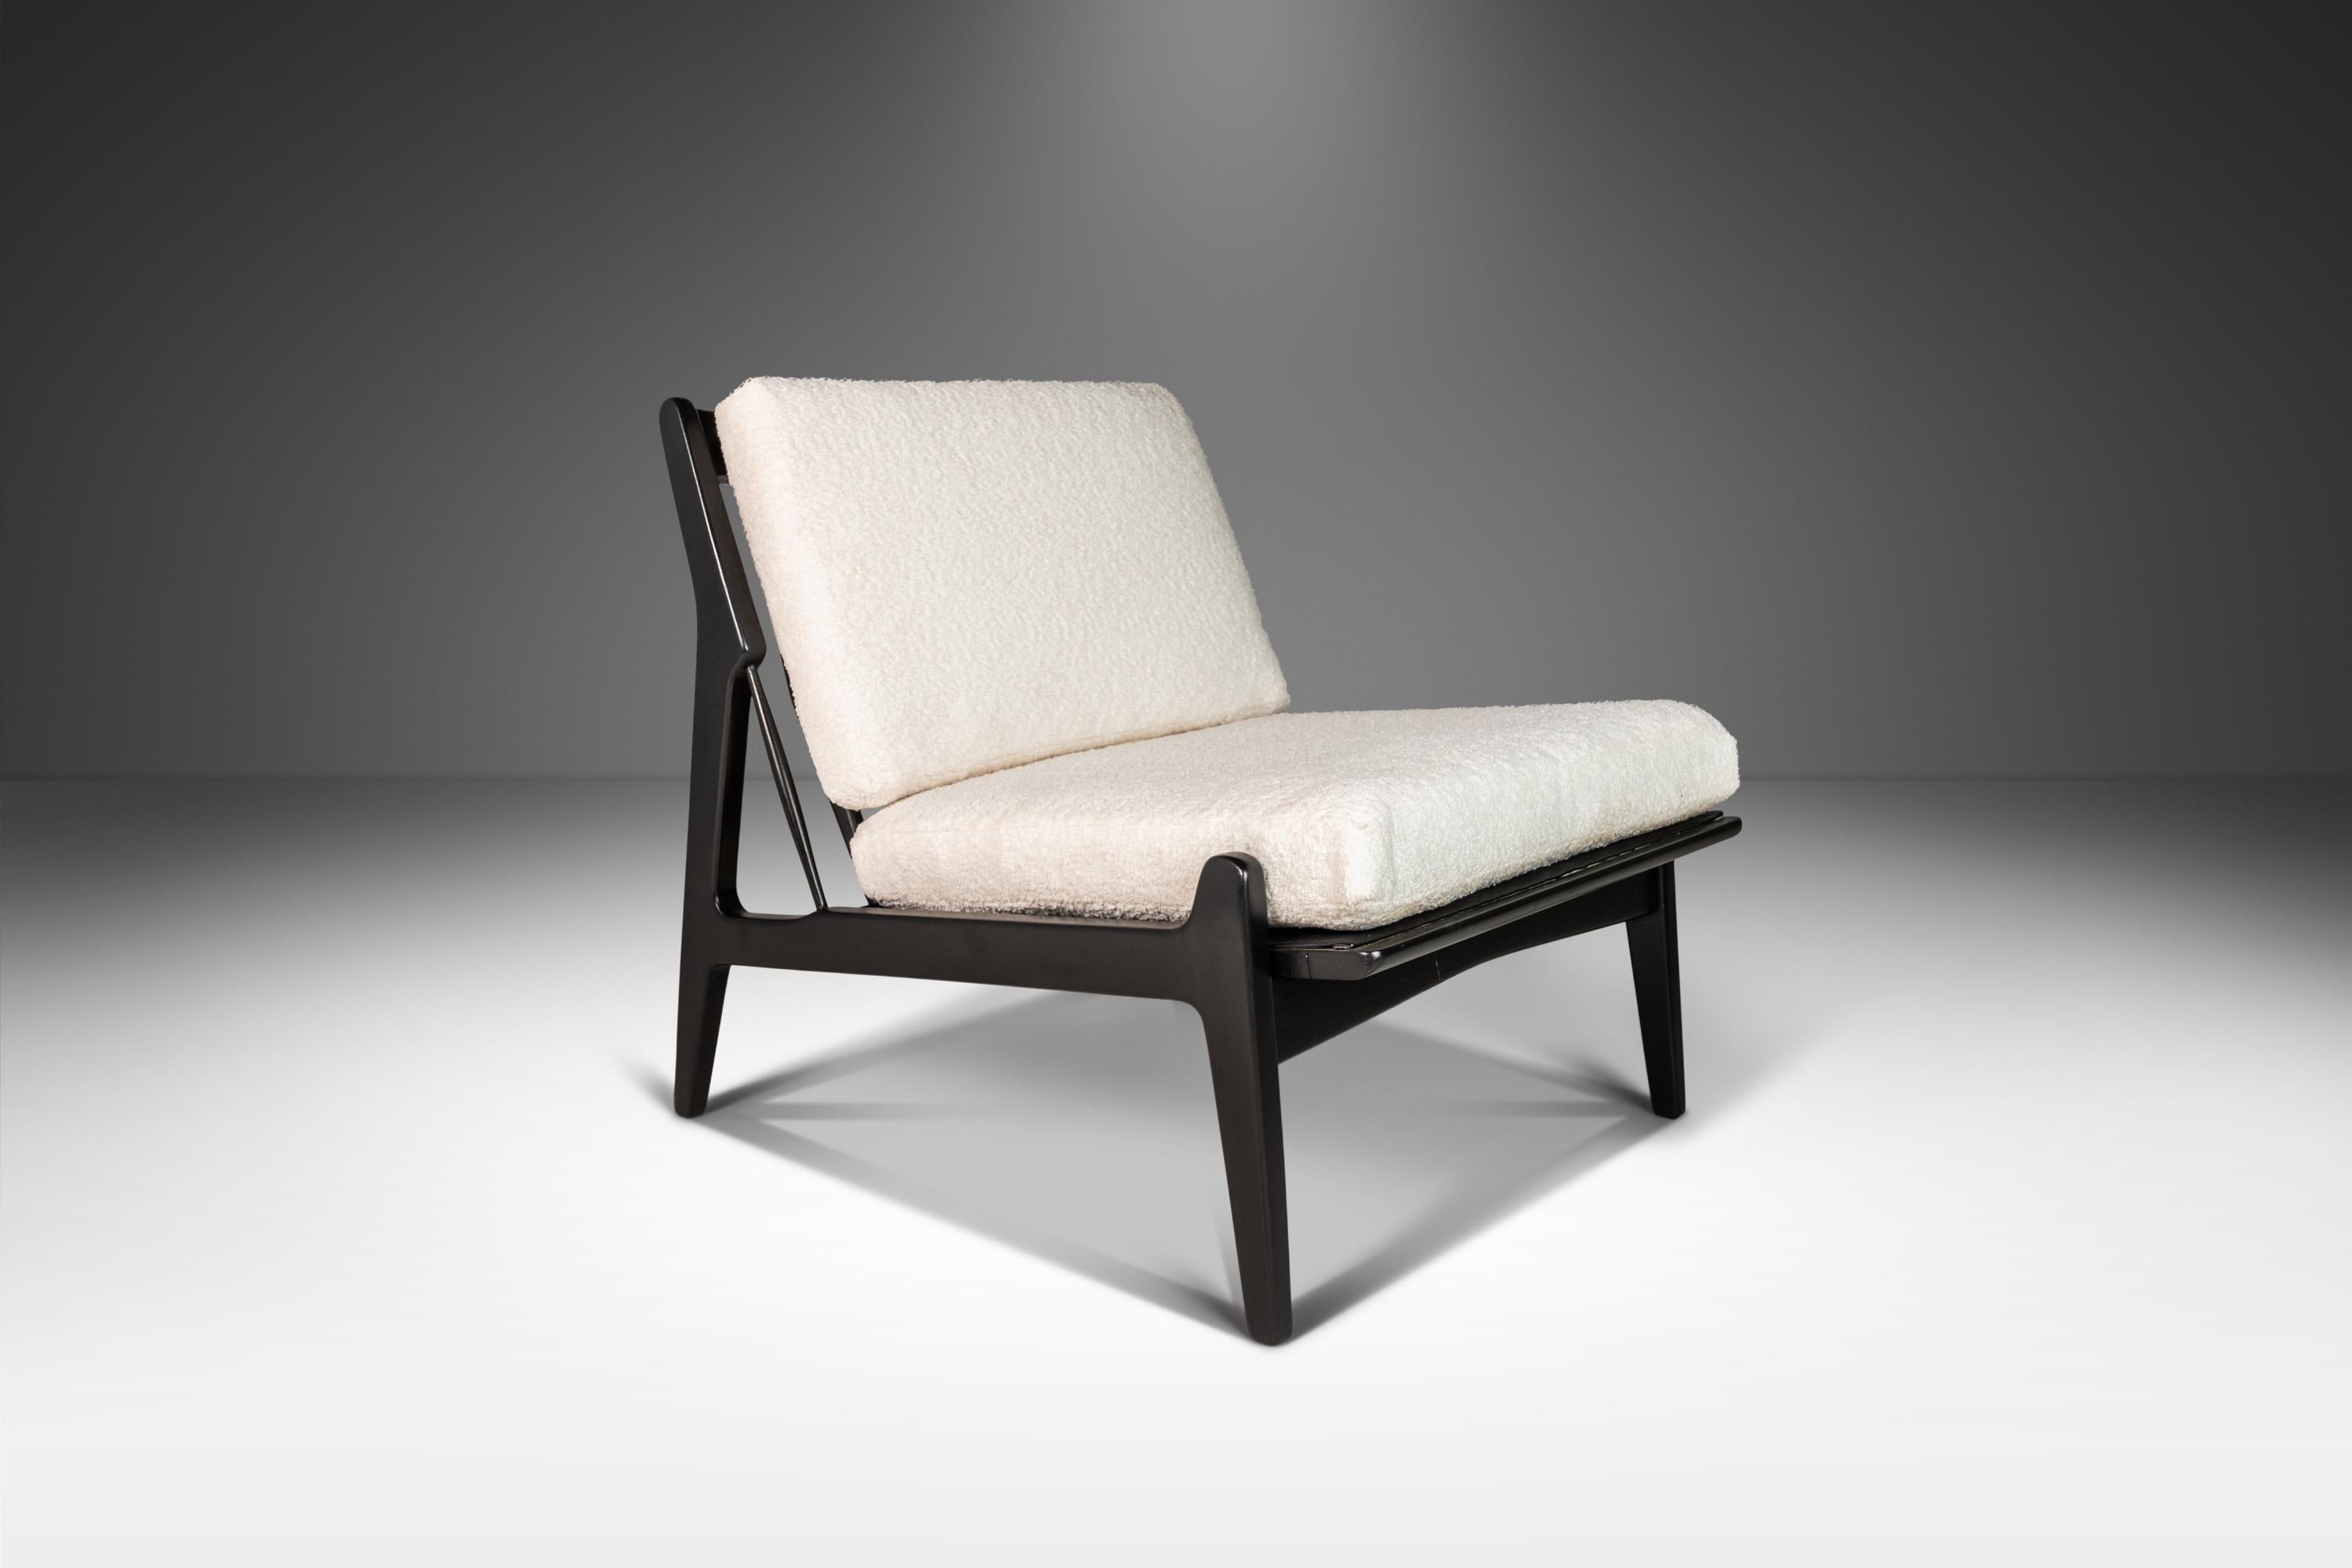 Set of Two Ebonized Lounge Chairs in Bouclé by Ib Kofod Larsen for Selig, 1950s For Sale 5